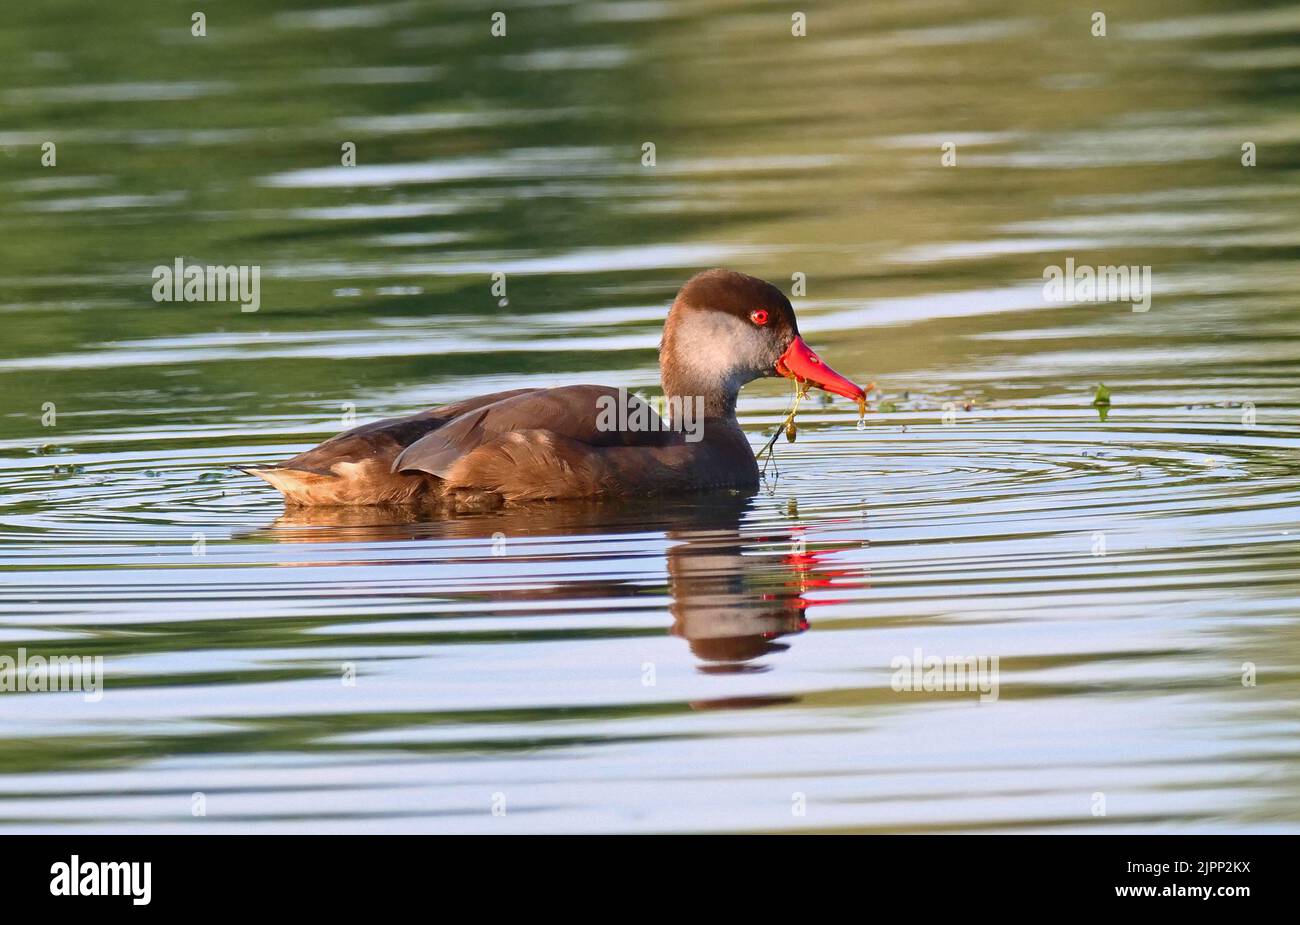 07 August 2022, Schleswig-Holstein, Plön: 07.08.2022, Ploen. A Pochard Duckling (Netta rufina) in dress is swimming on the big Ploen Lake. The diving duck is looking for food and parts of water plants are still hanging out of its beak from the last dive. Photo: Wolfram Steinberg/dpa Photo: Wolfram Steinberg/dpa Stock Photo